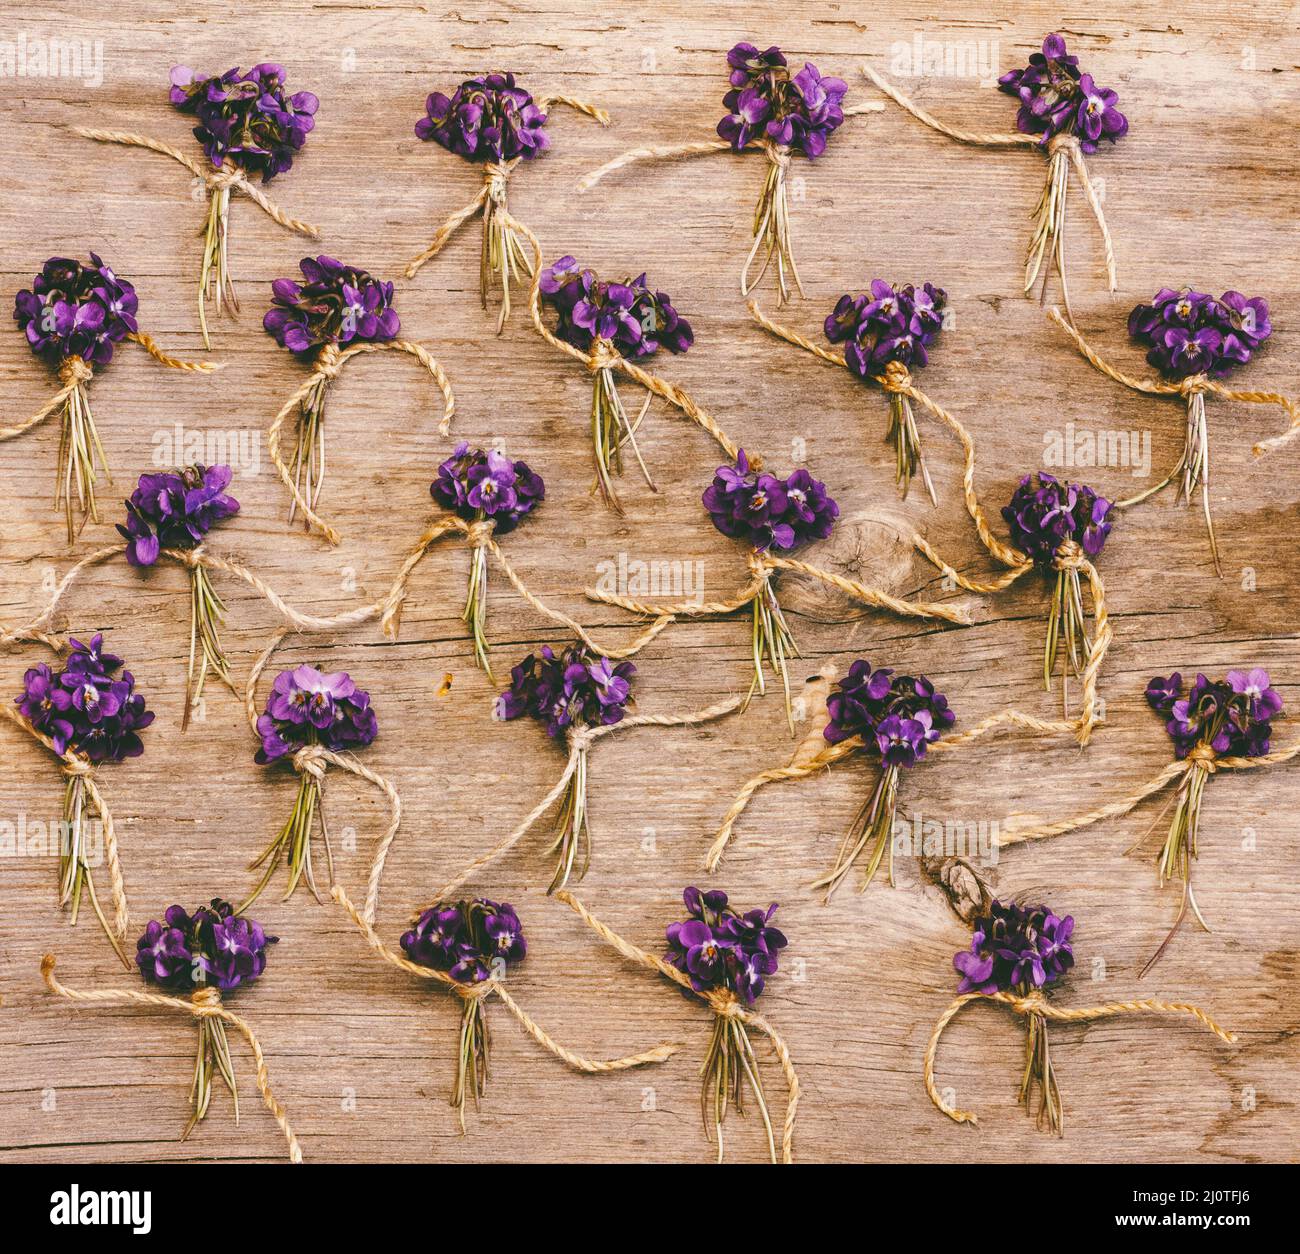 Little bunches of wild flowers and violets on old wooden background, top view flat lay Stock Photo